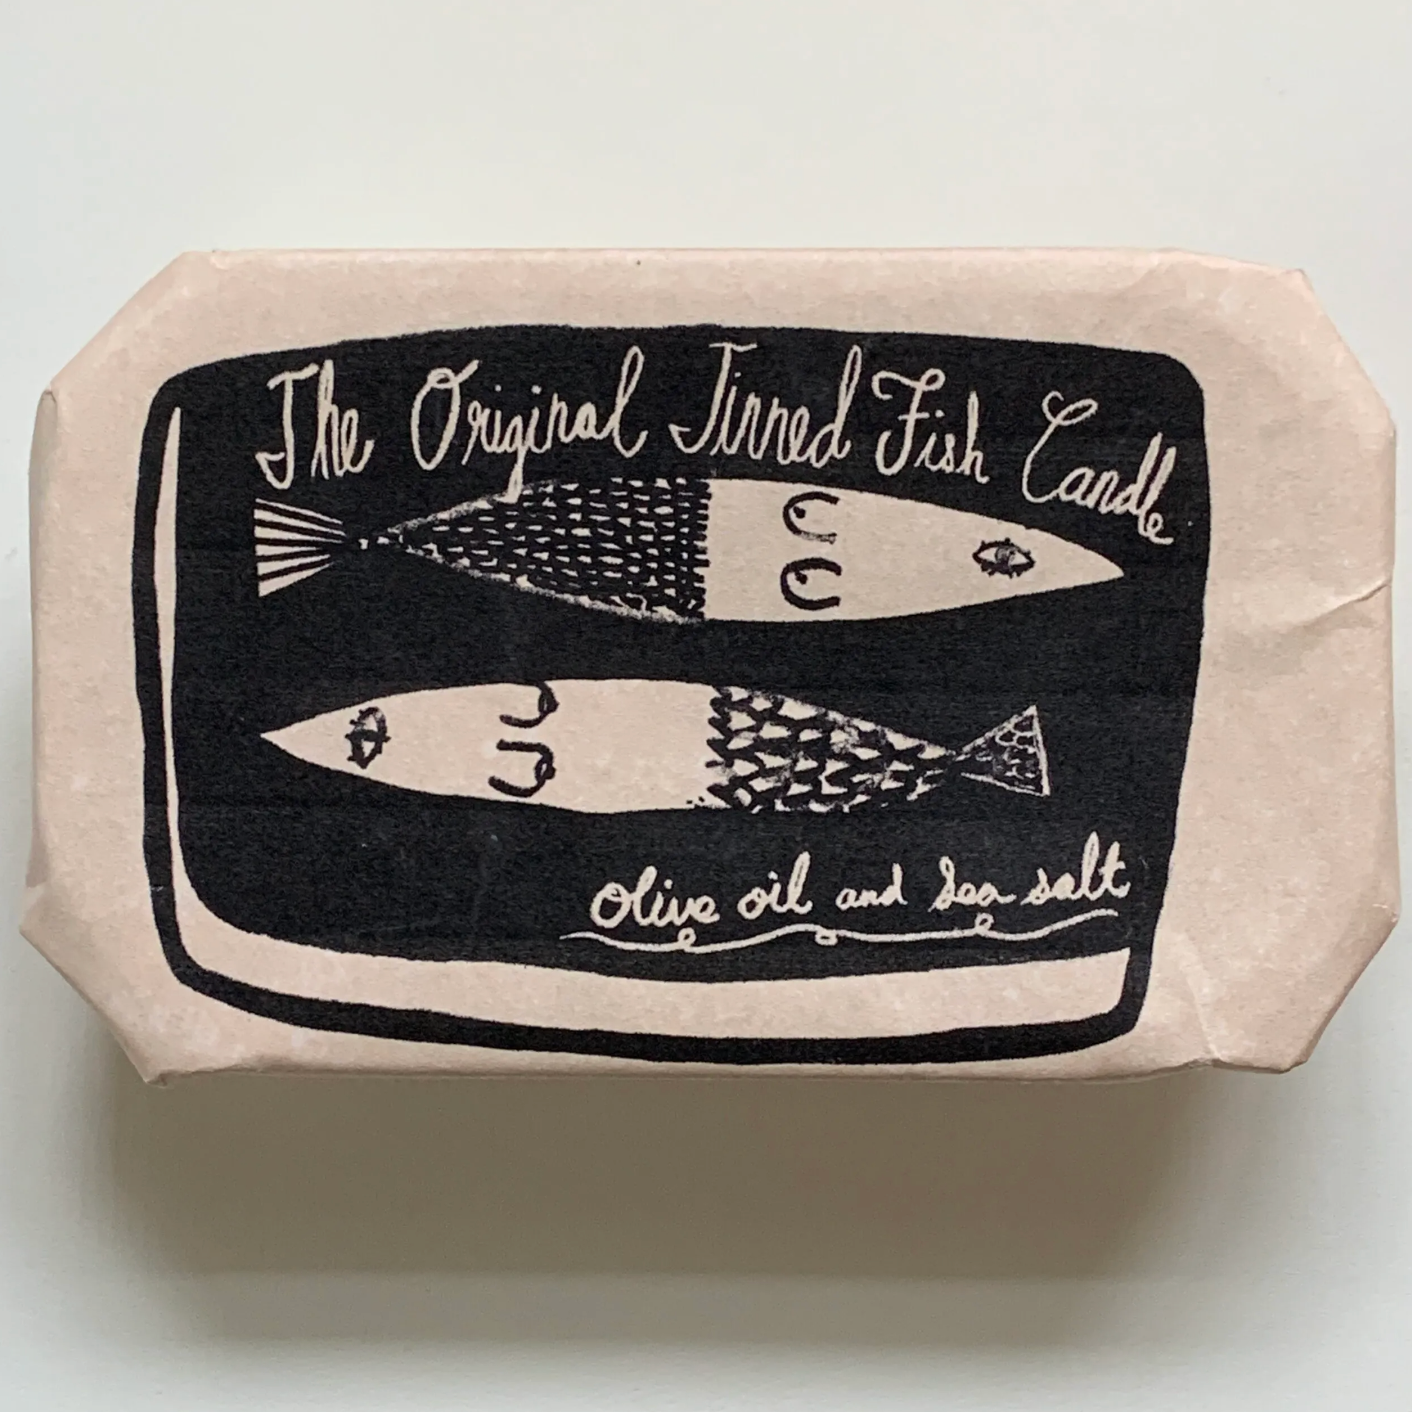 Tinned Fish Candle outer paper packaging -- text up top reads "The Original Tinned Fish Candle", two fishes in the center and underneath text reads "olive oil and sea salt" 